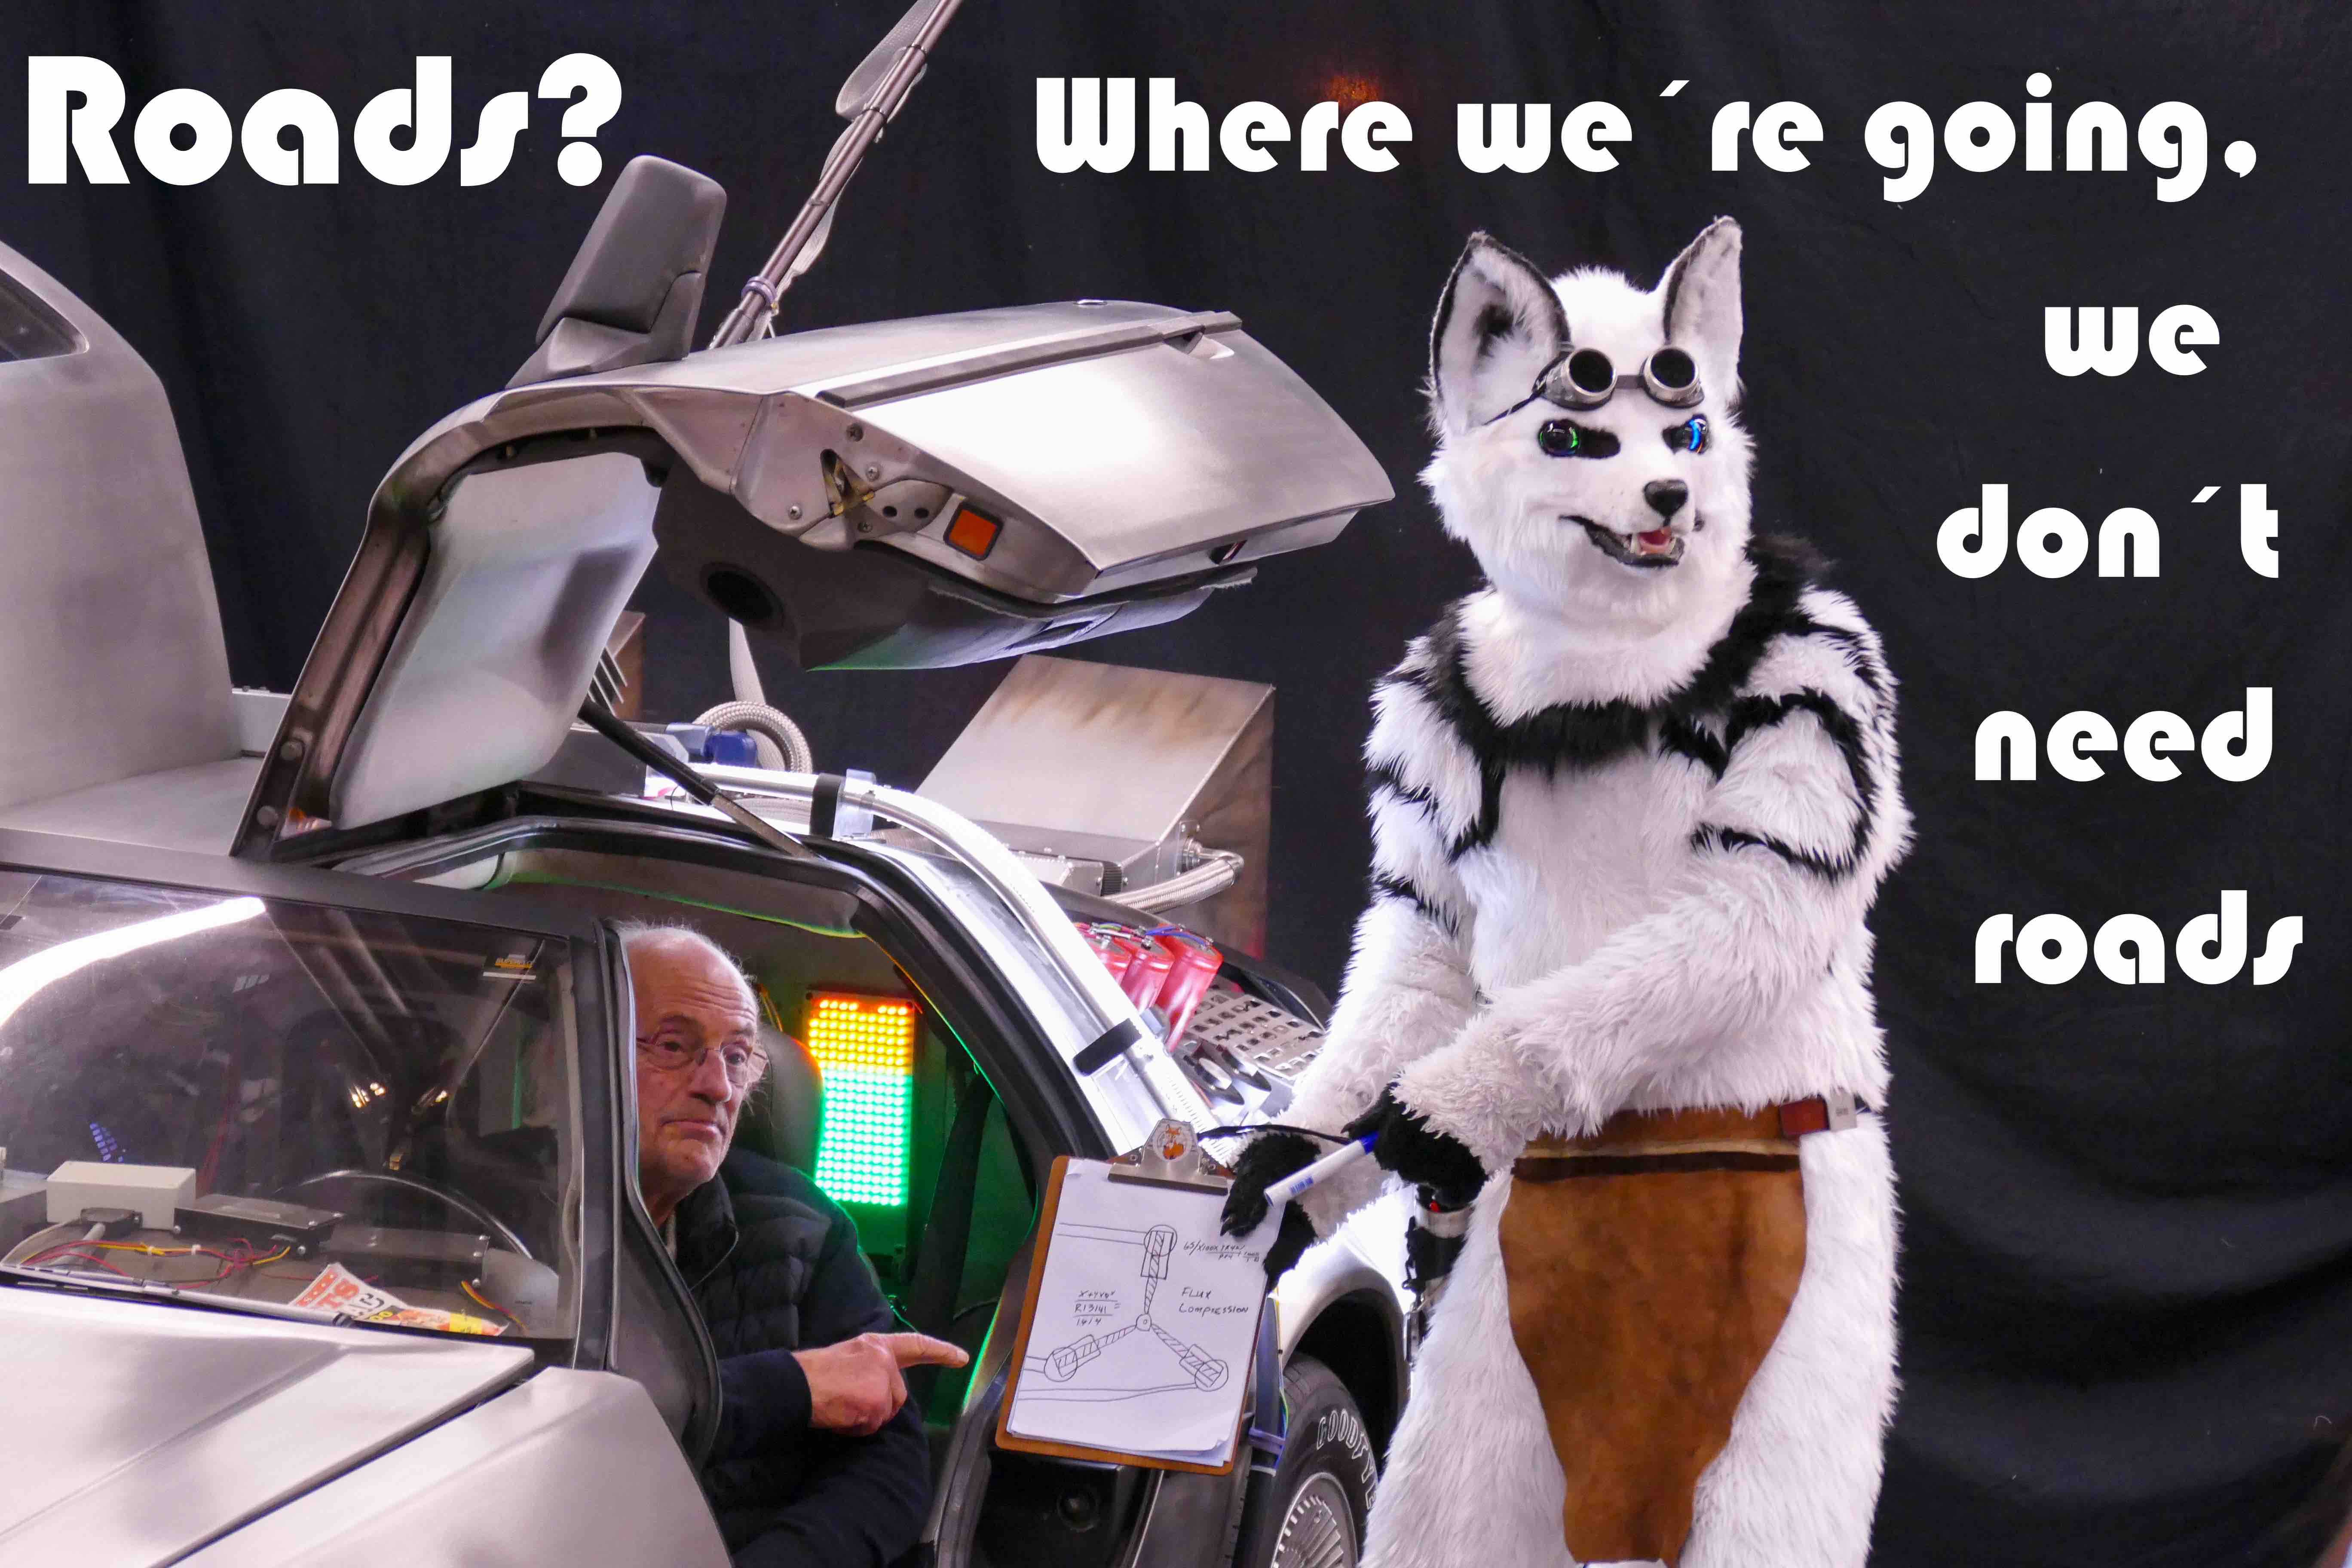 Roads? where we're going, we don't need roads / SciFox and Doc Brown discussing the flux capacitor for time travel